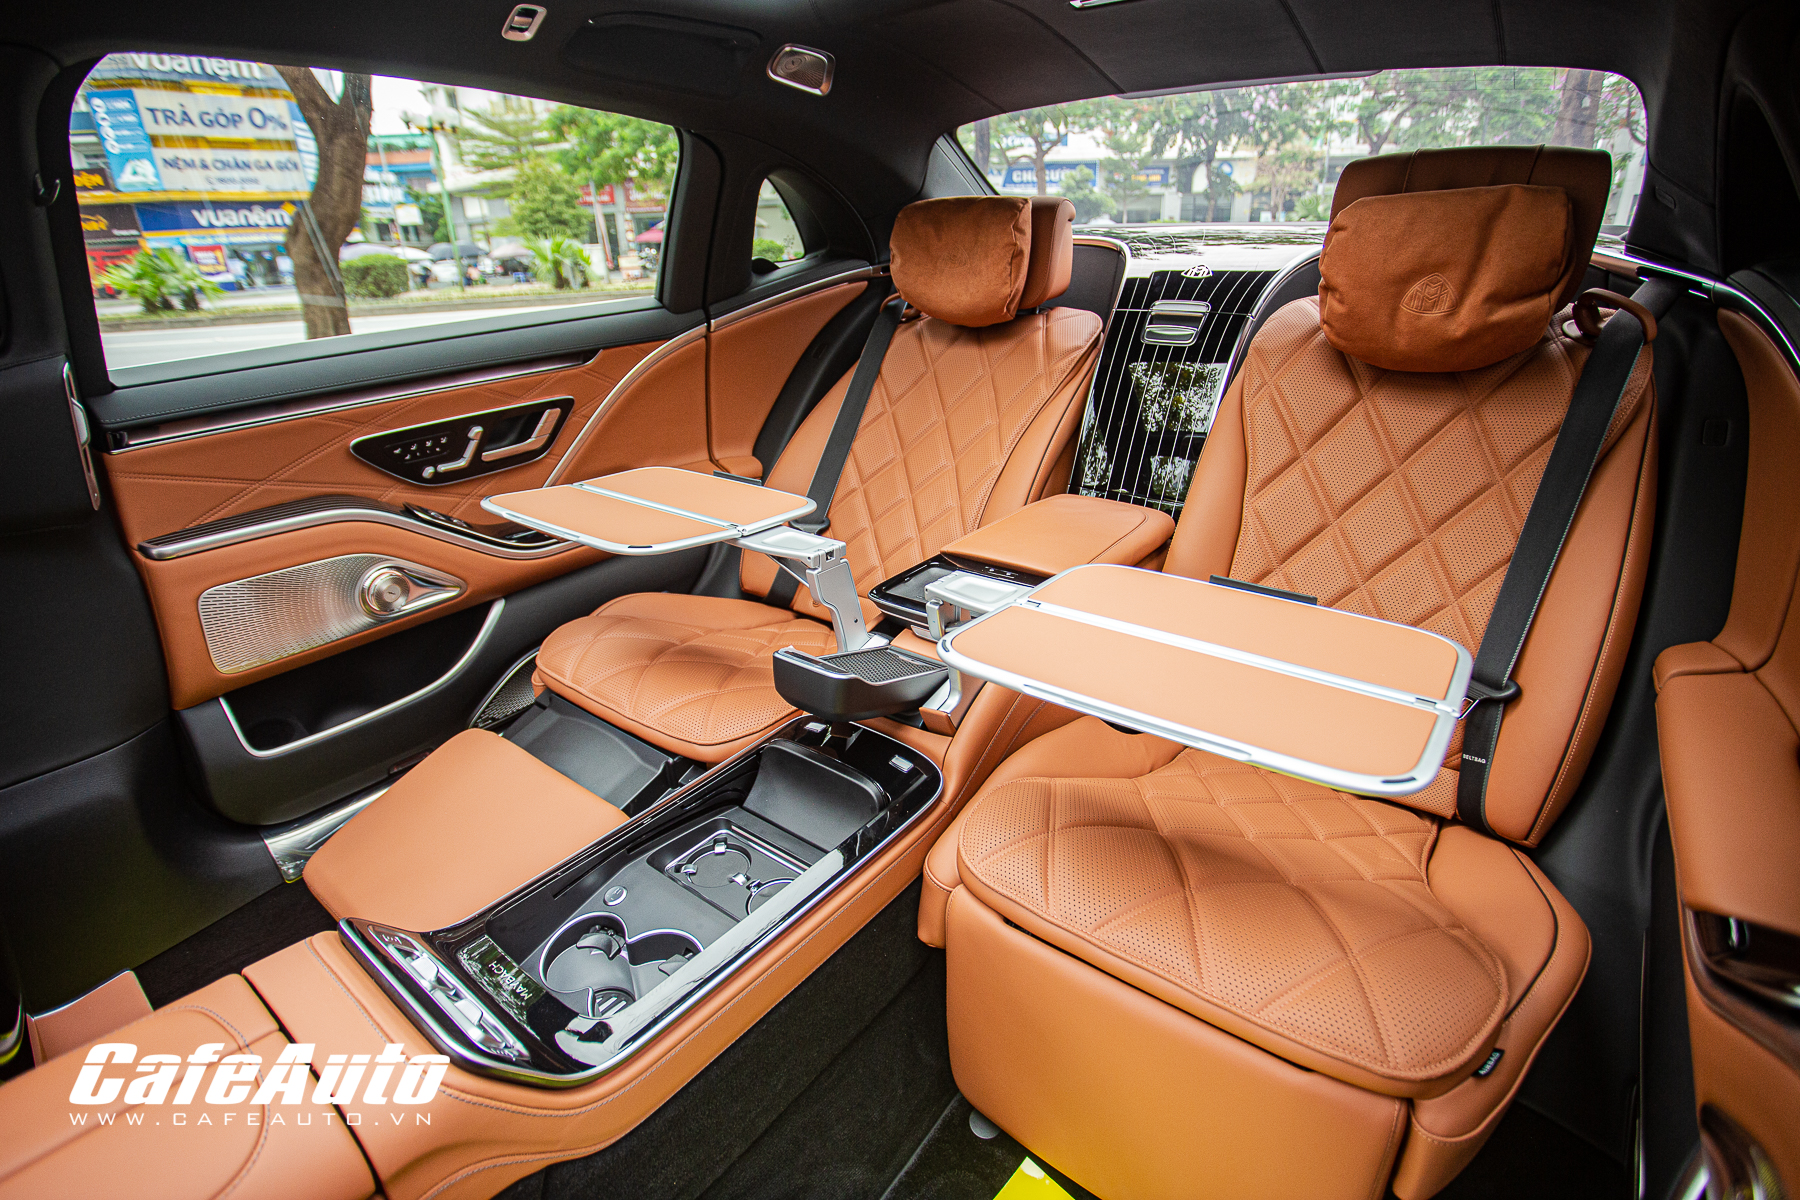 mercedes-maybach-s-680-chinh-hang-cafeautovn-8